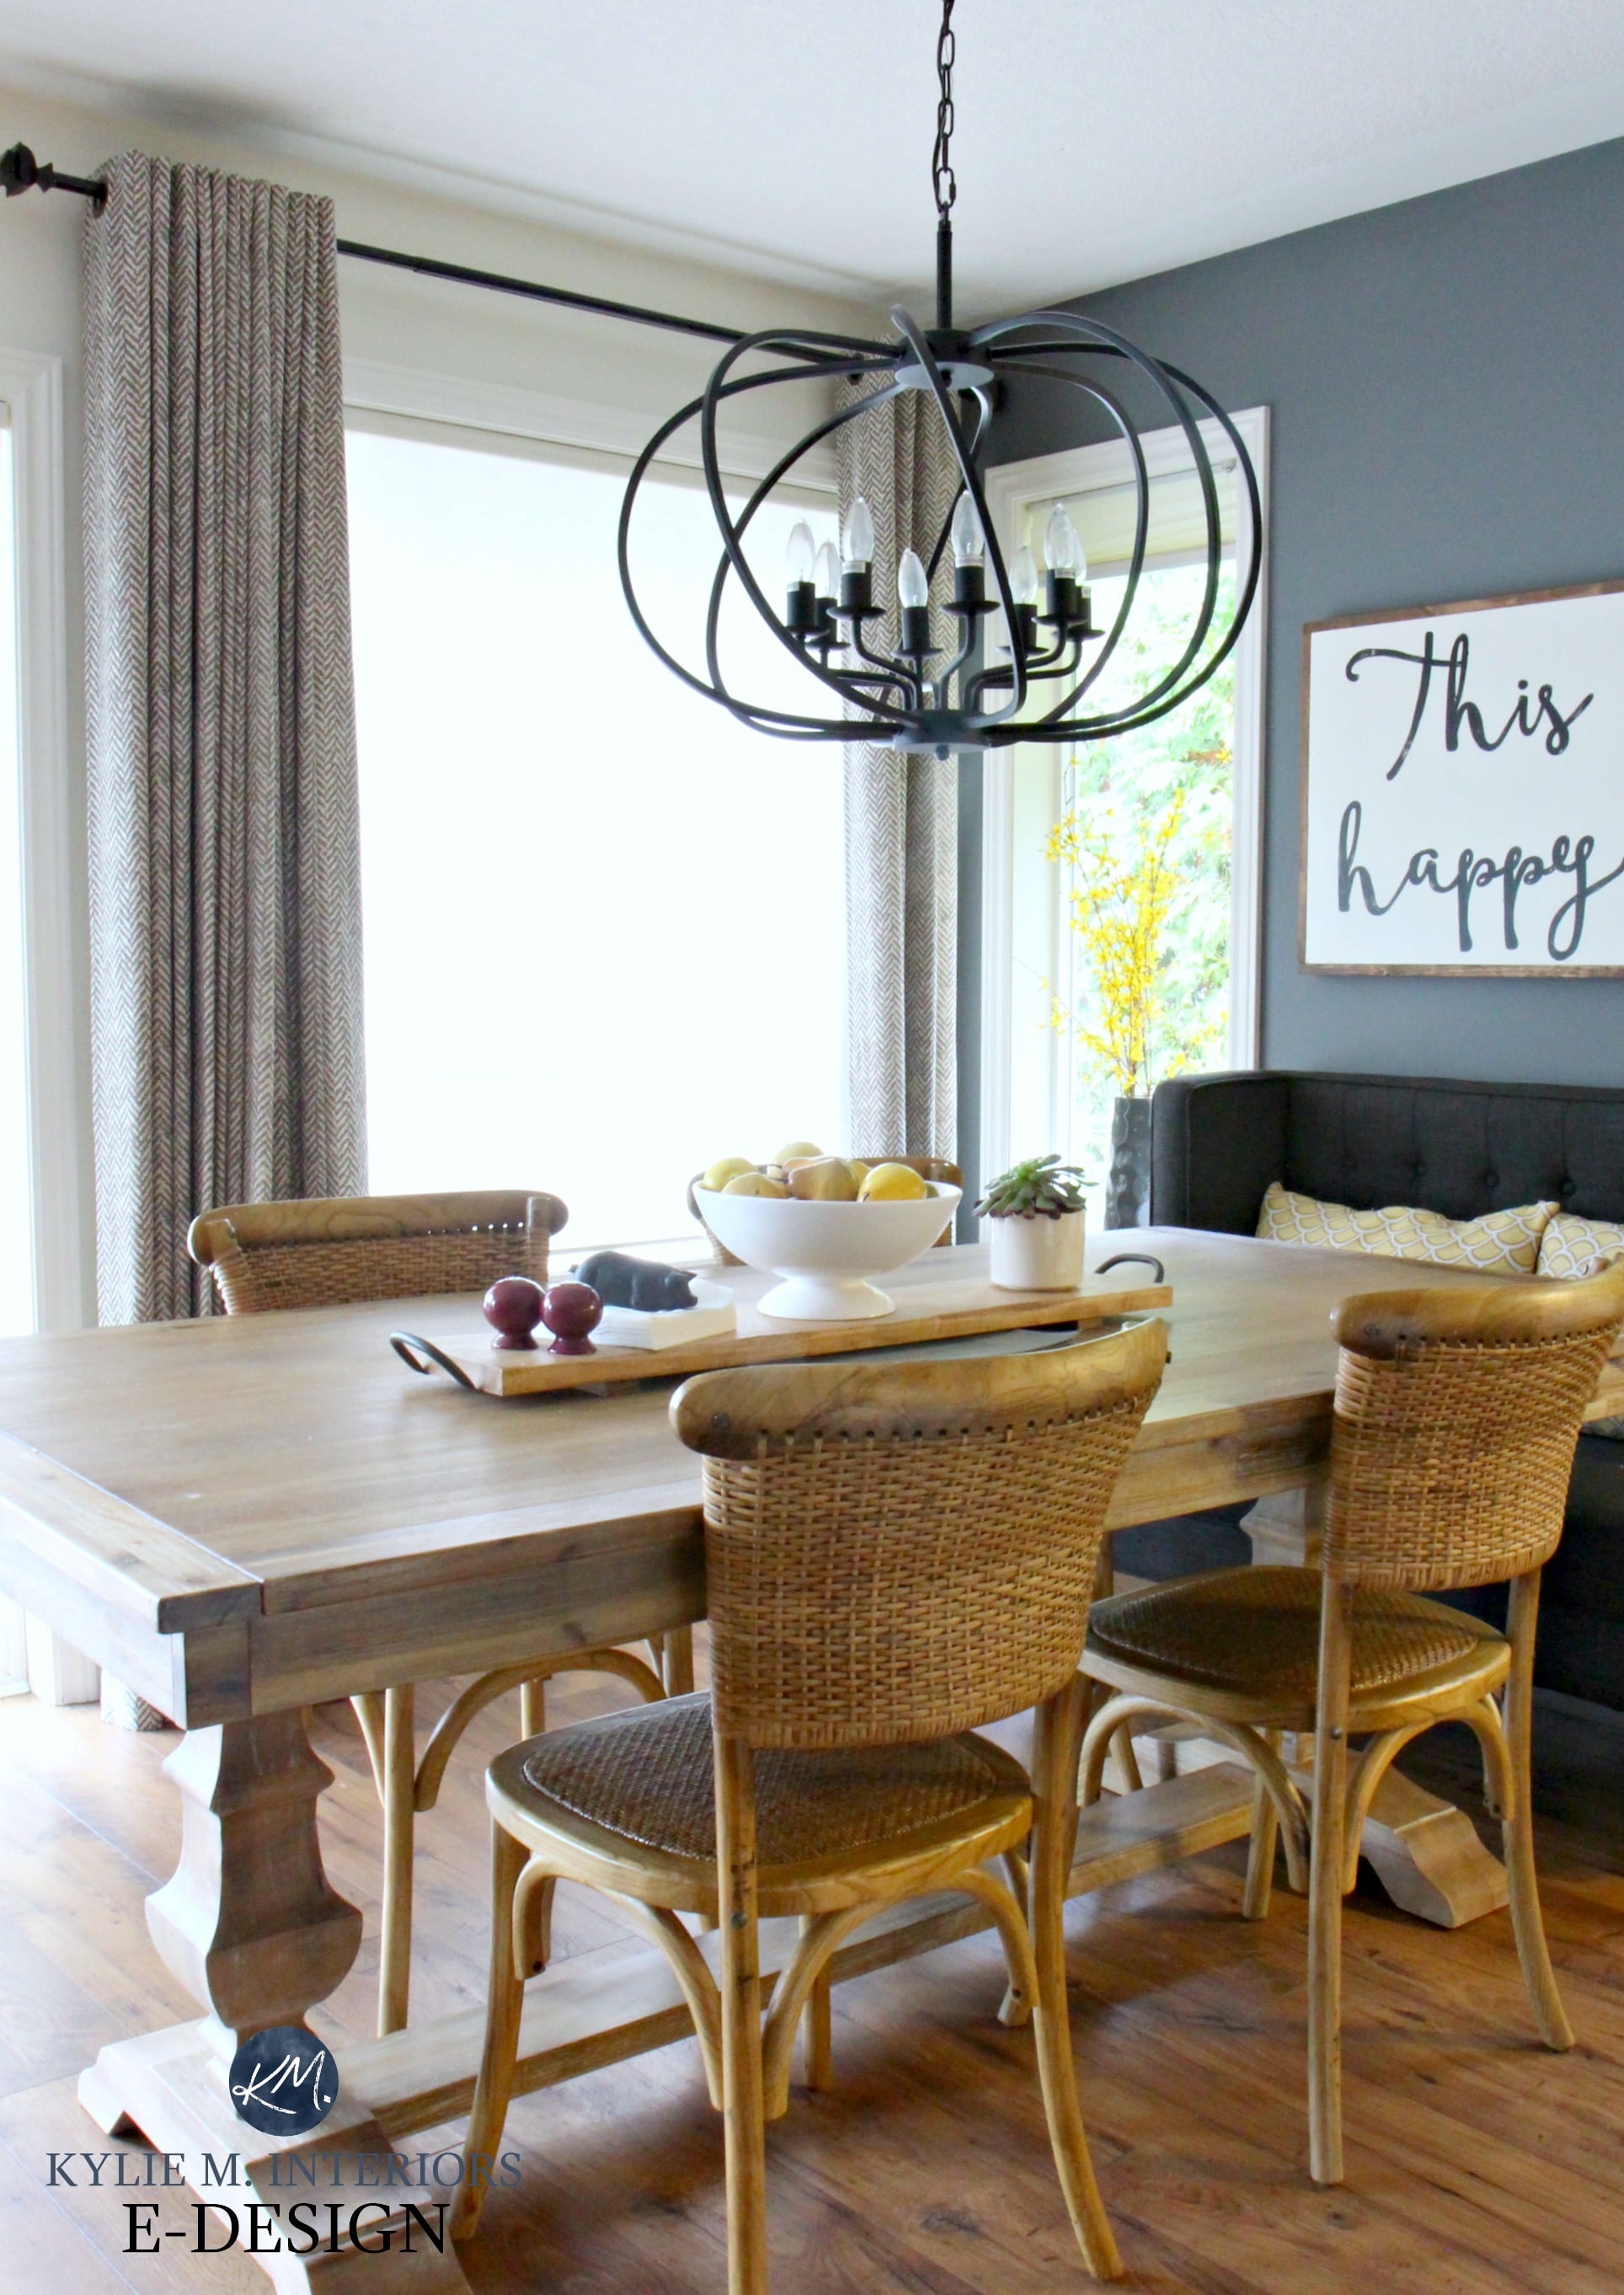 Farmhouse dining table with wicker chairs, chandelier. Kylie M E-design